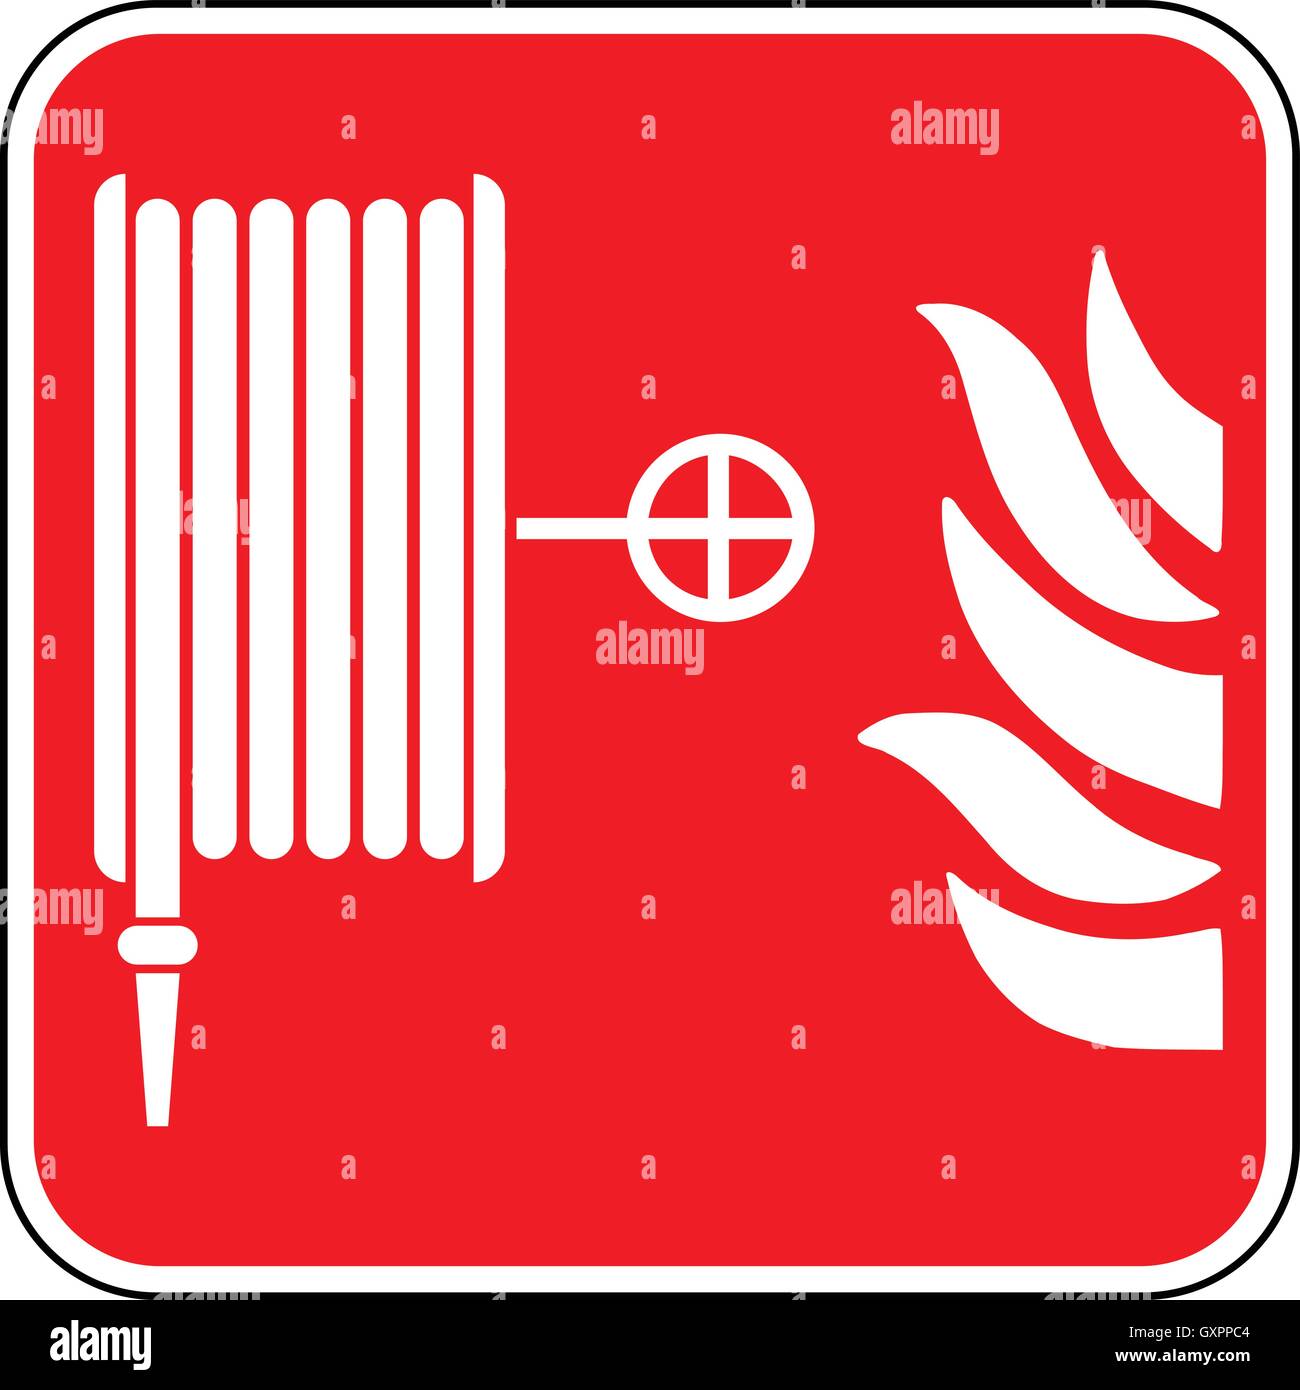 https://c8.alamy.com/comp/GXPPC4/emergency-fire-hose-reel-sign-white-fire-hose-icon-on-a-red-square-GXPPC4.jpg